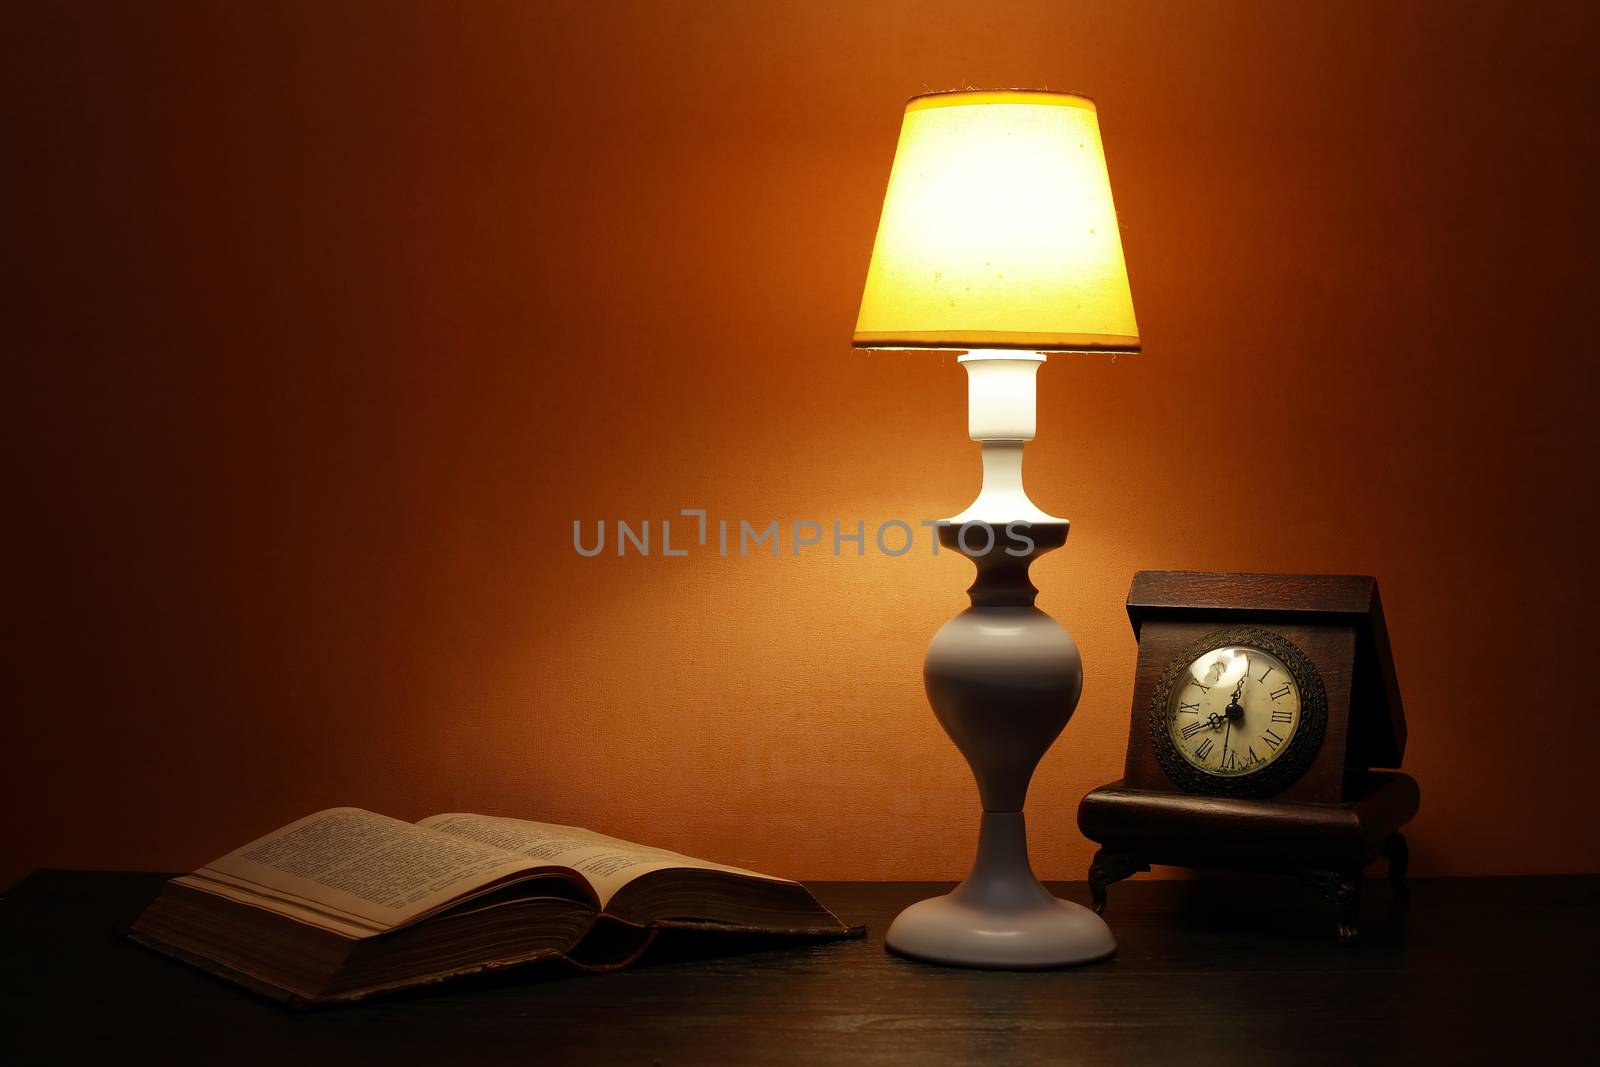 Elegance white desk lamp with yellow lampshade near open book